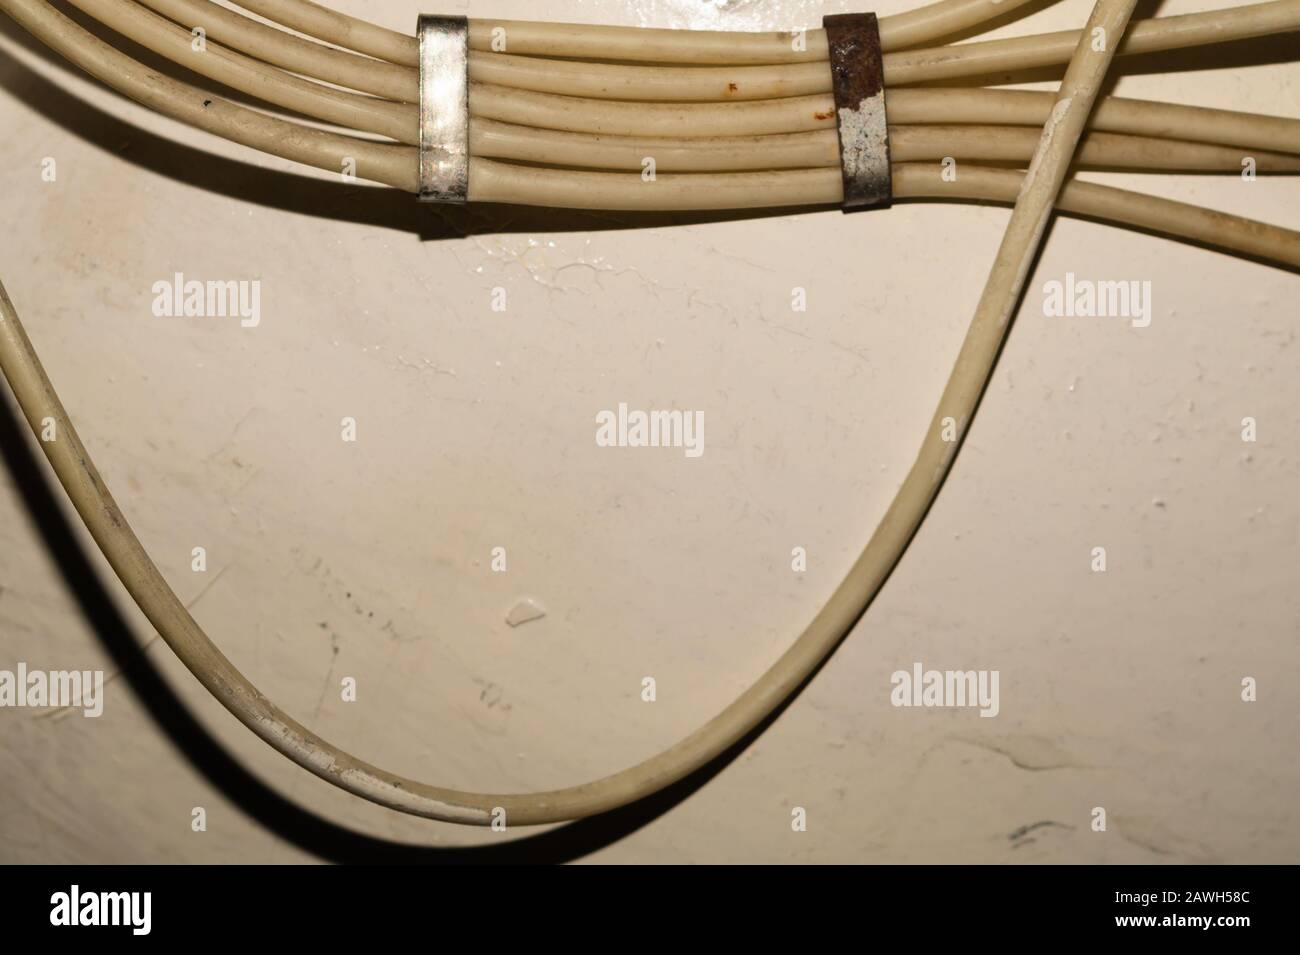 Old electrical wires or cables hanging on the wall. industrial background Stock Photo